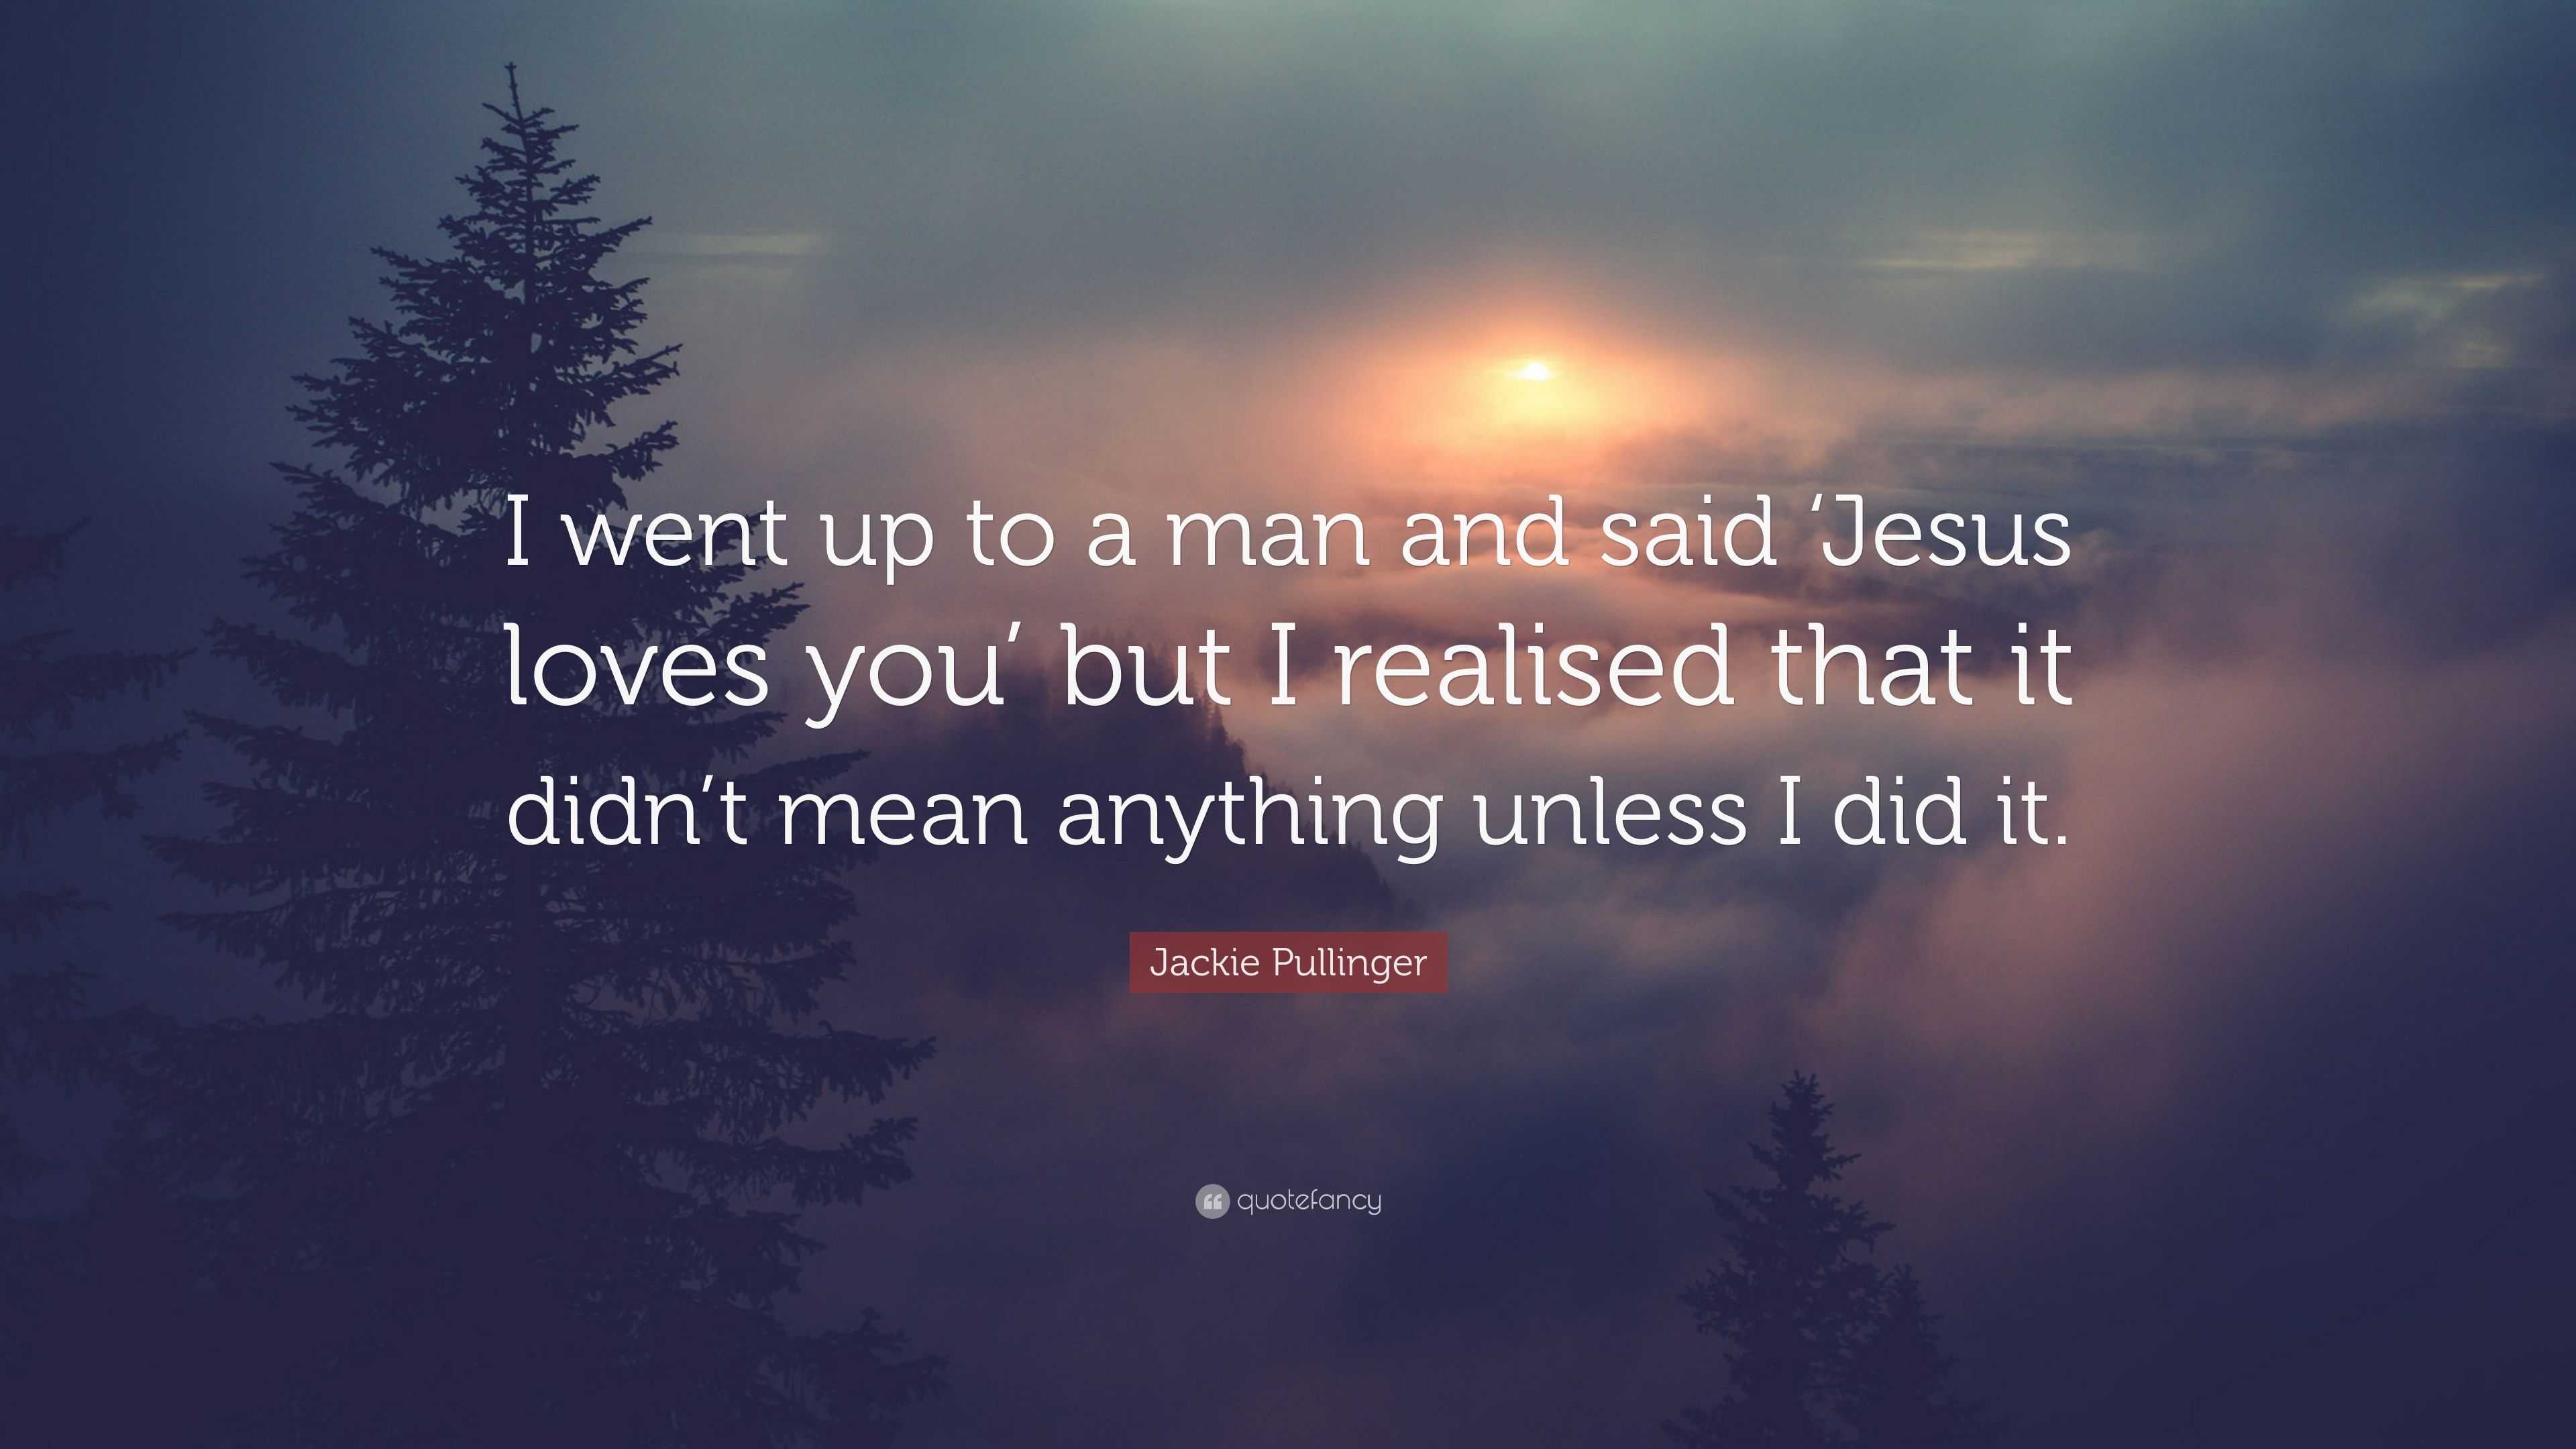 Jackie Pullinger Quote “I went up to a man and said Jesus loves